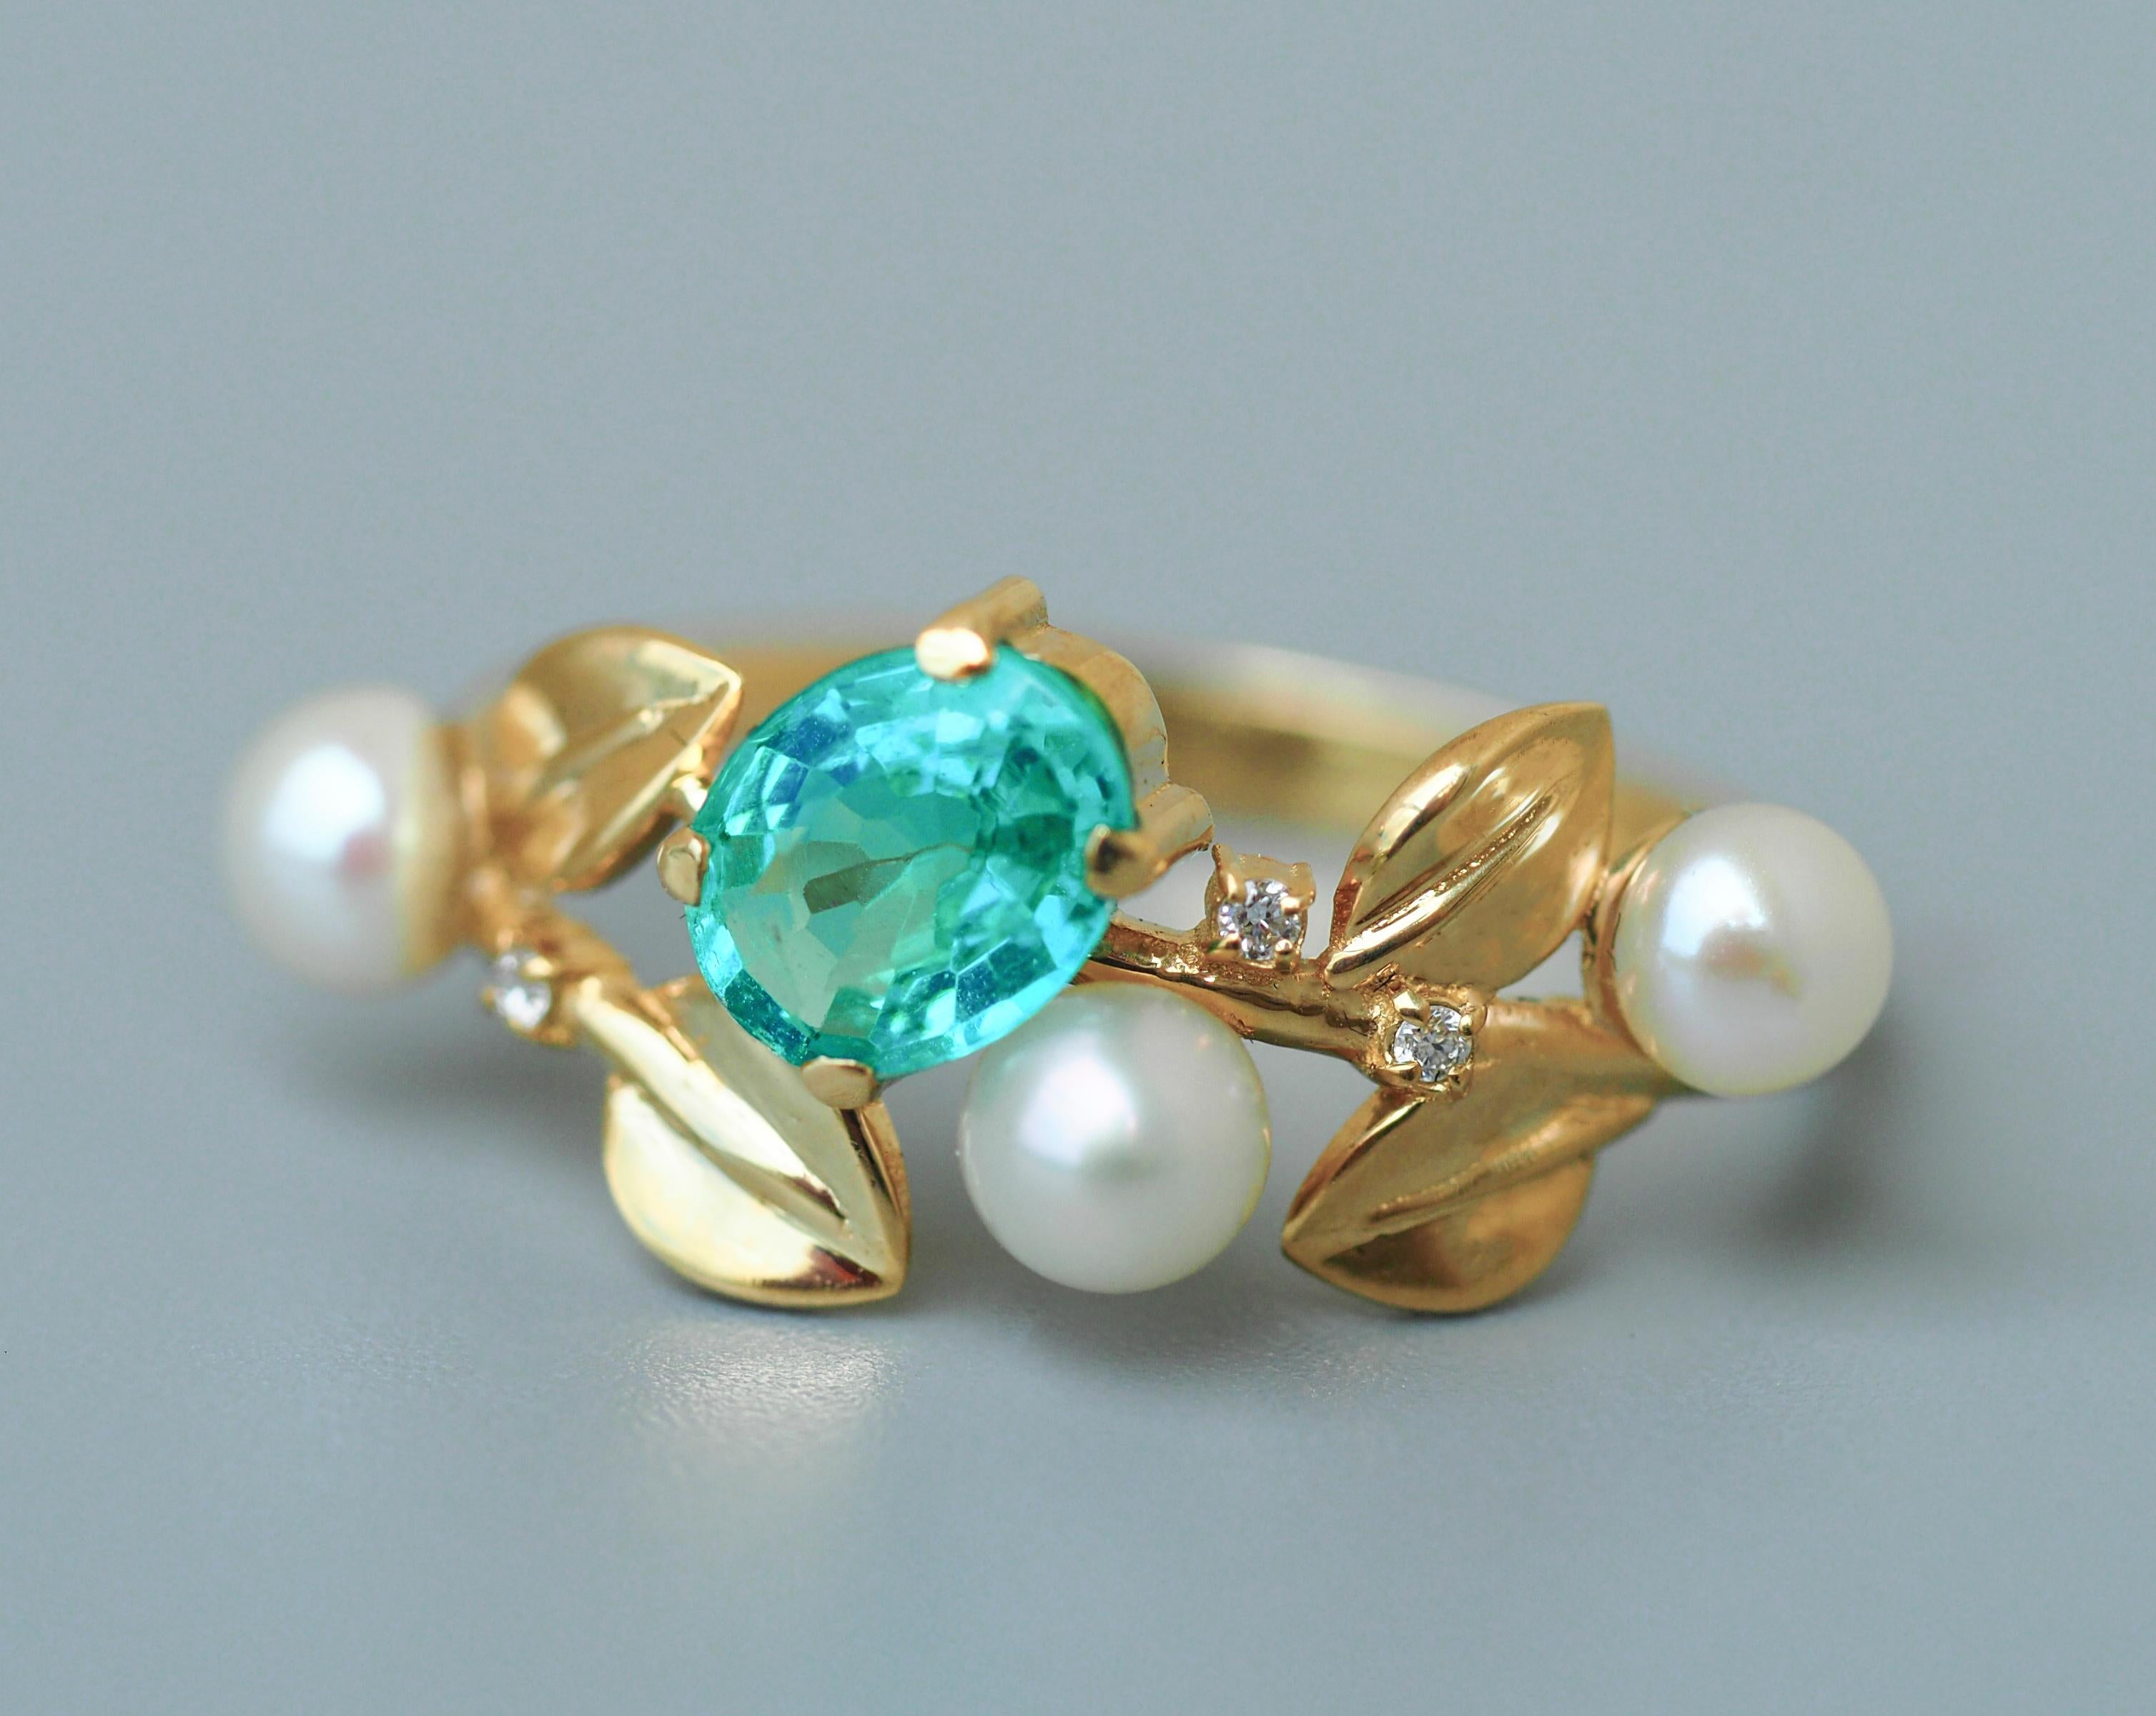 Oval Cut 14k Gold Floral Ring with Oval Apatite, Diamonds and Pearls